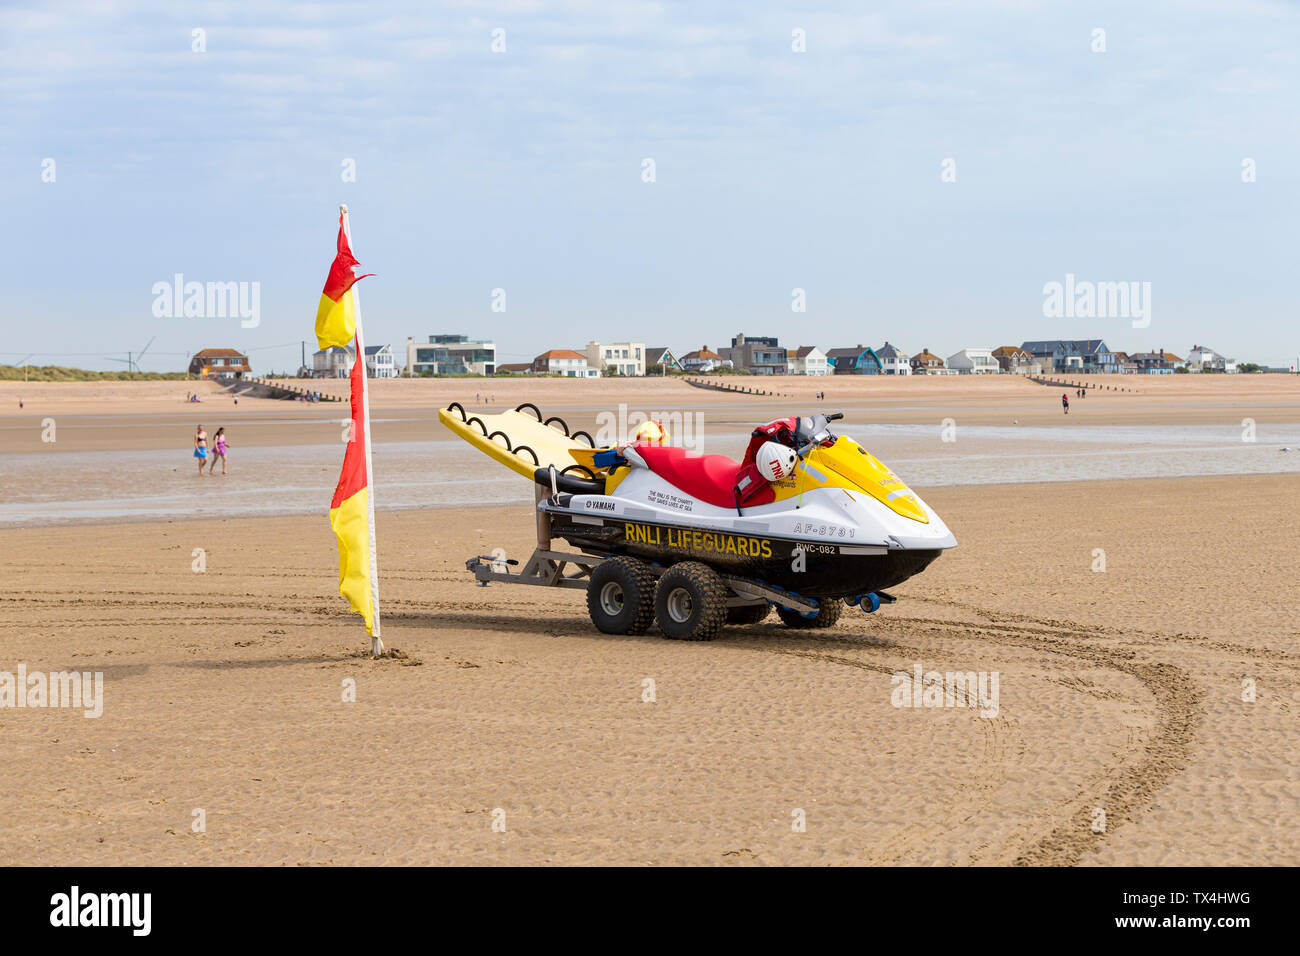 RNLI lifeguards jetski parked on the camber sands beach, east sussex, uk Stock Photo